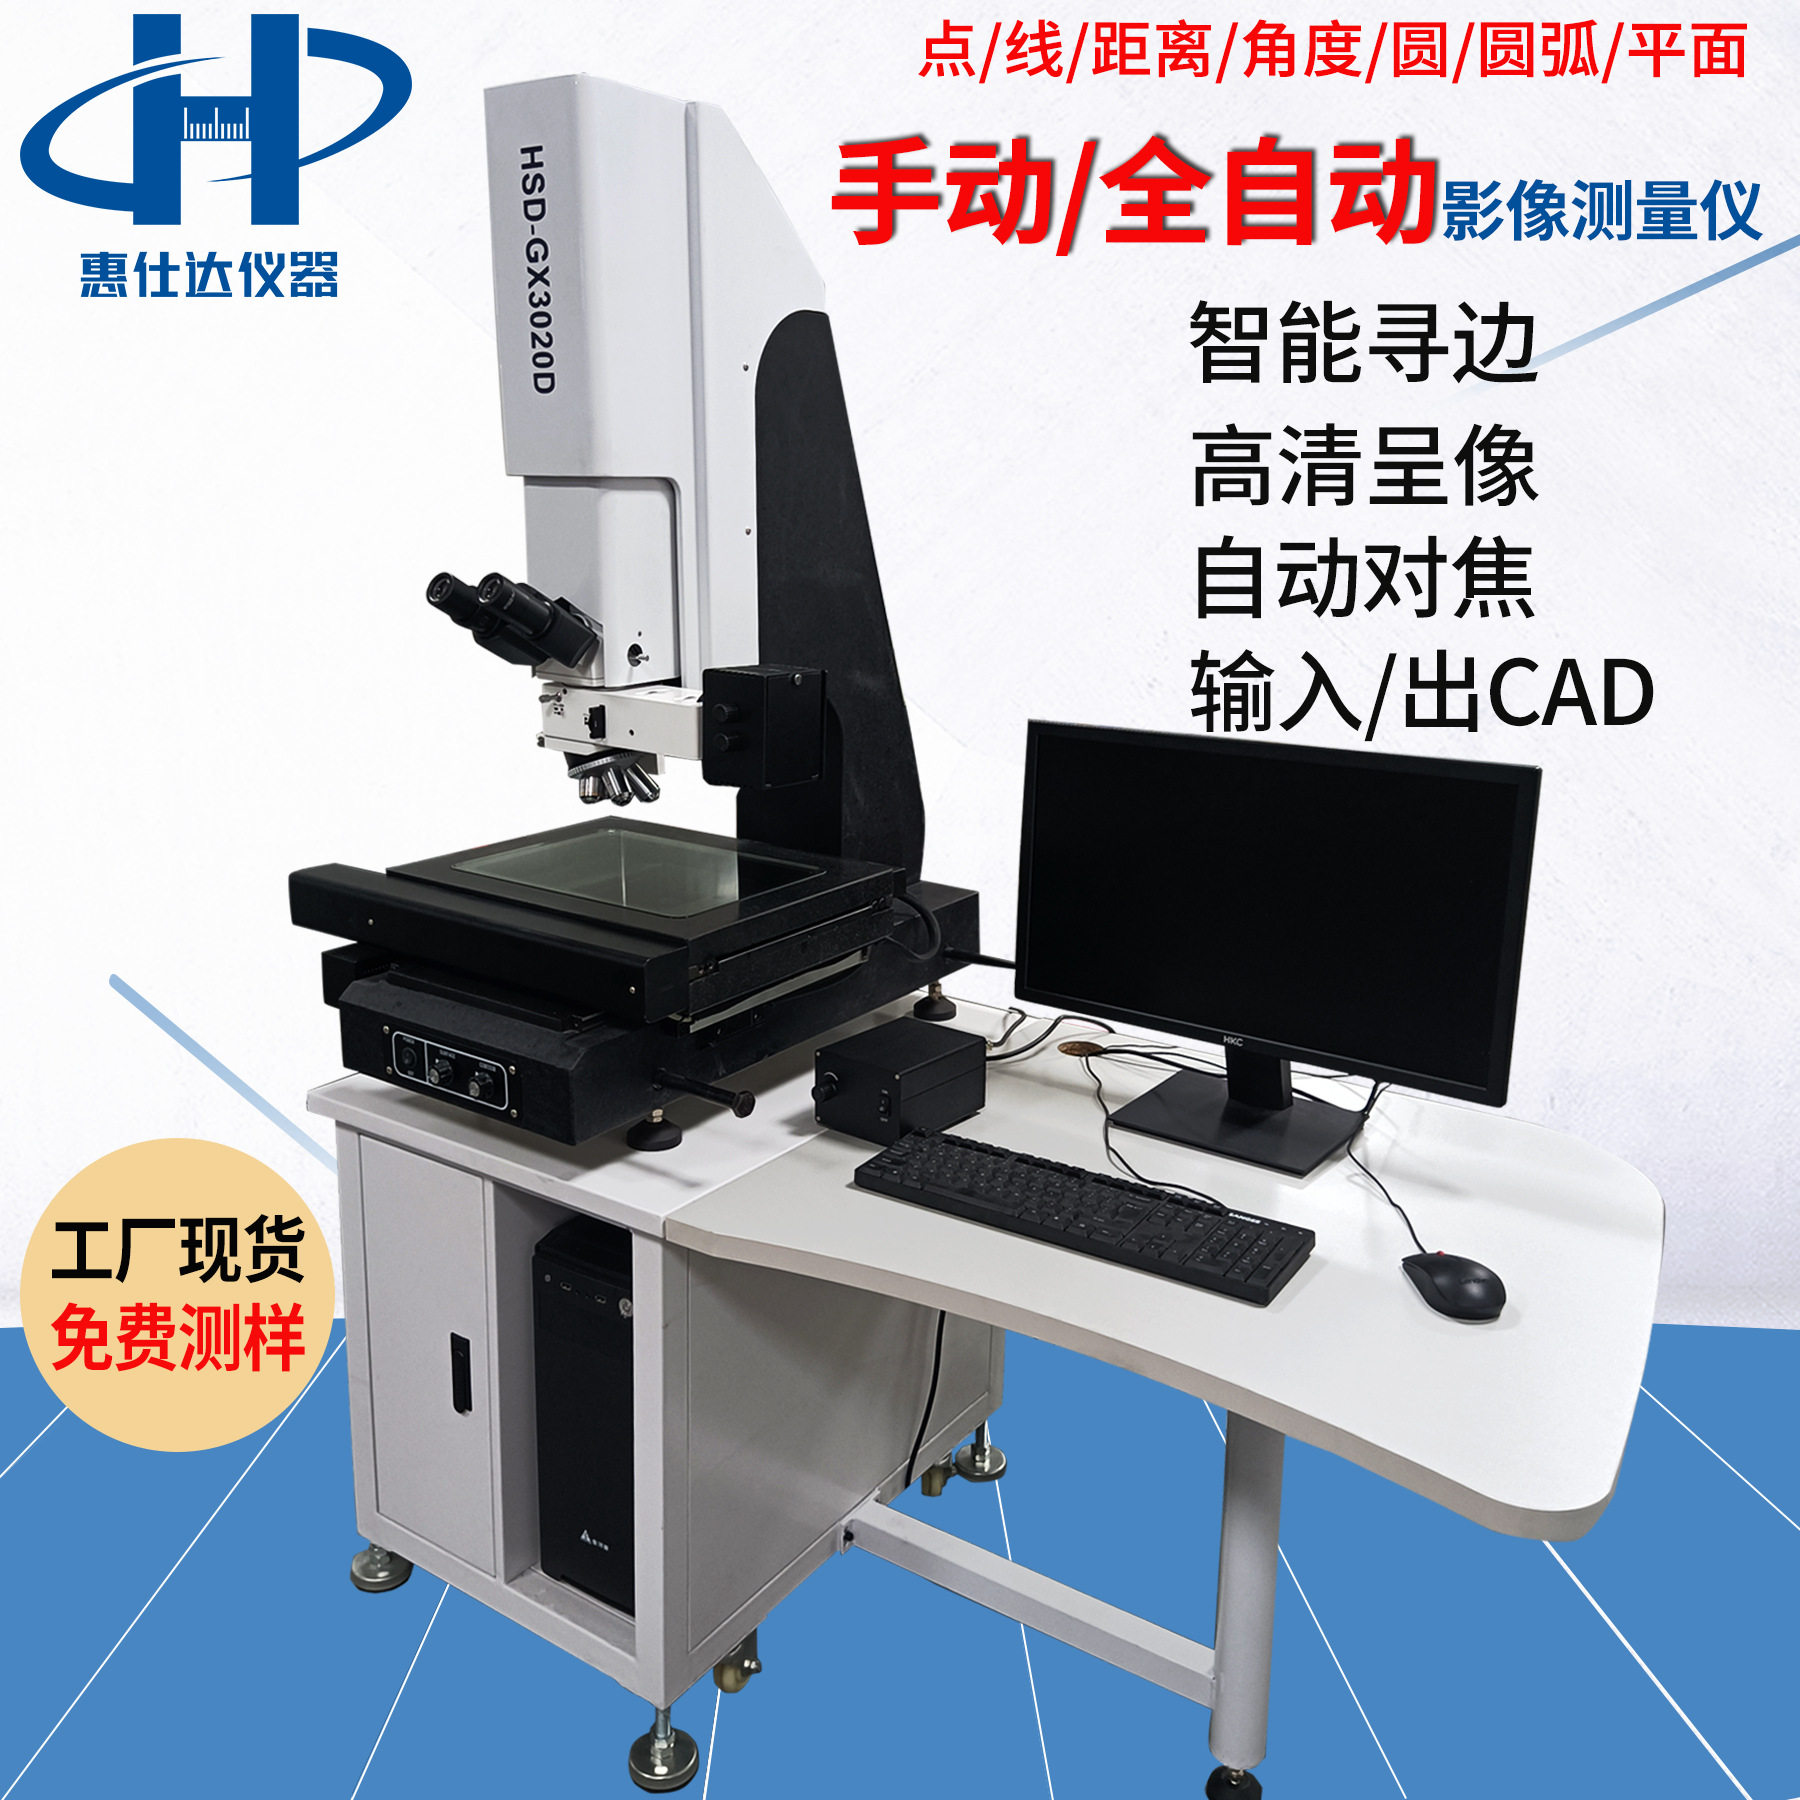 Stroke fully automatic 2.5 image Measuring instrument optics image Projector 2.5 Dimensional